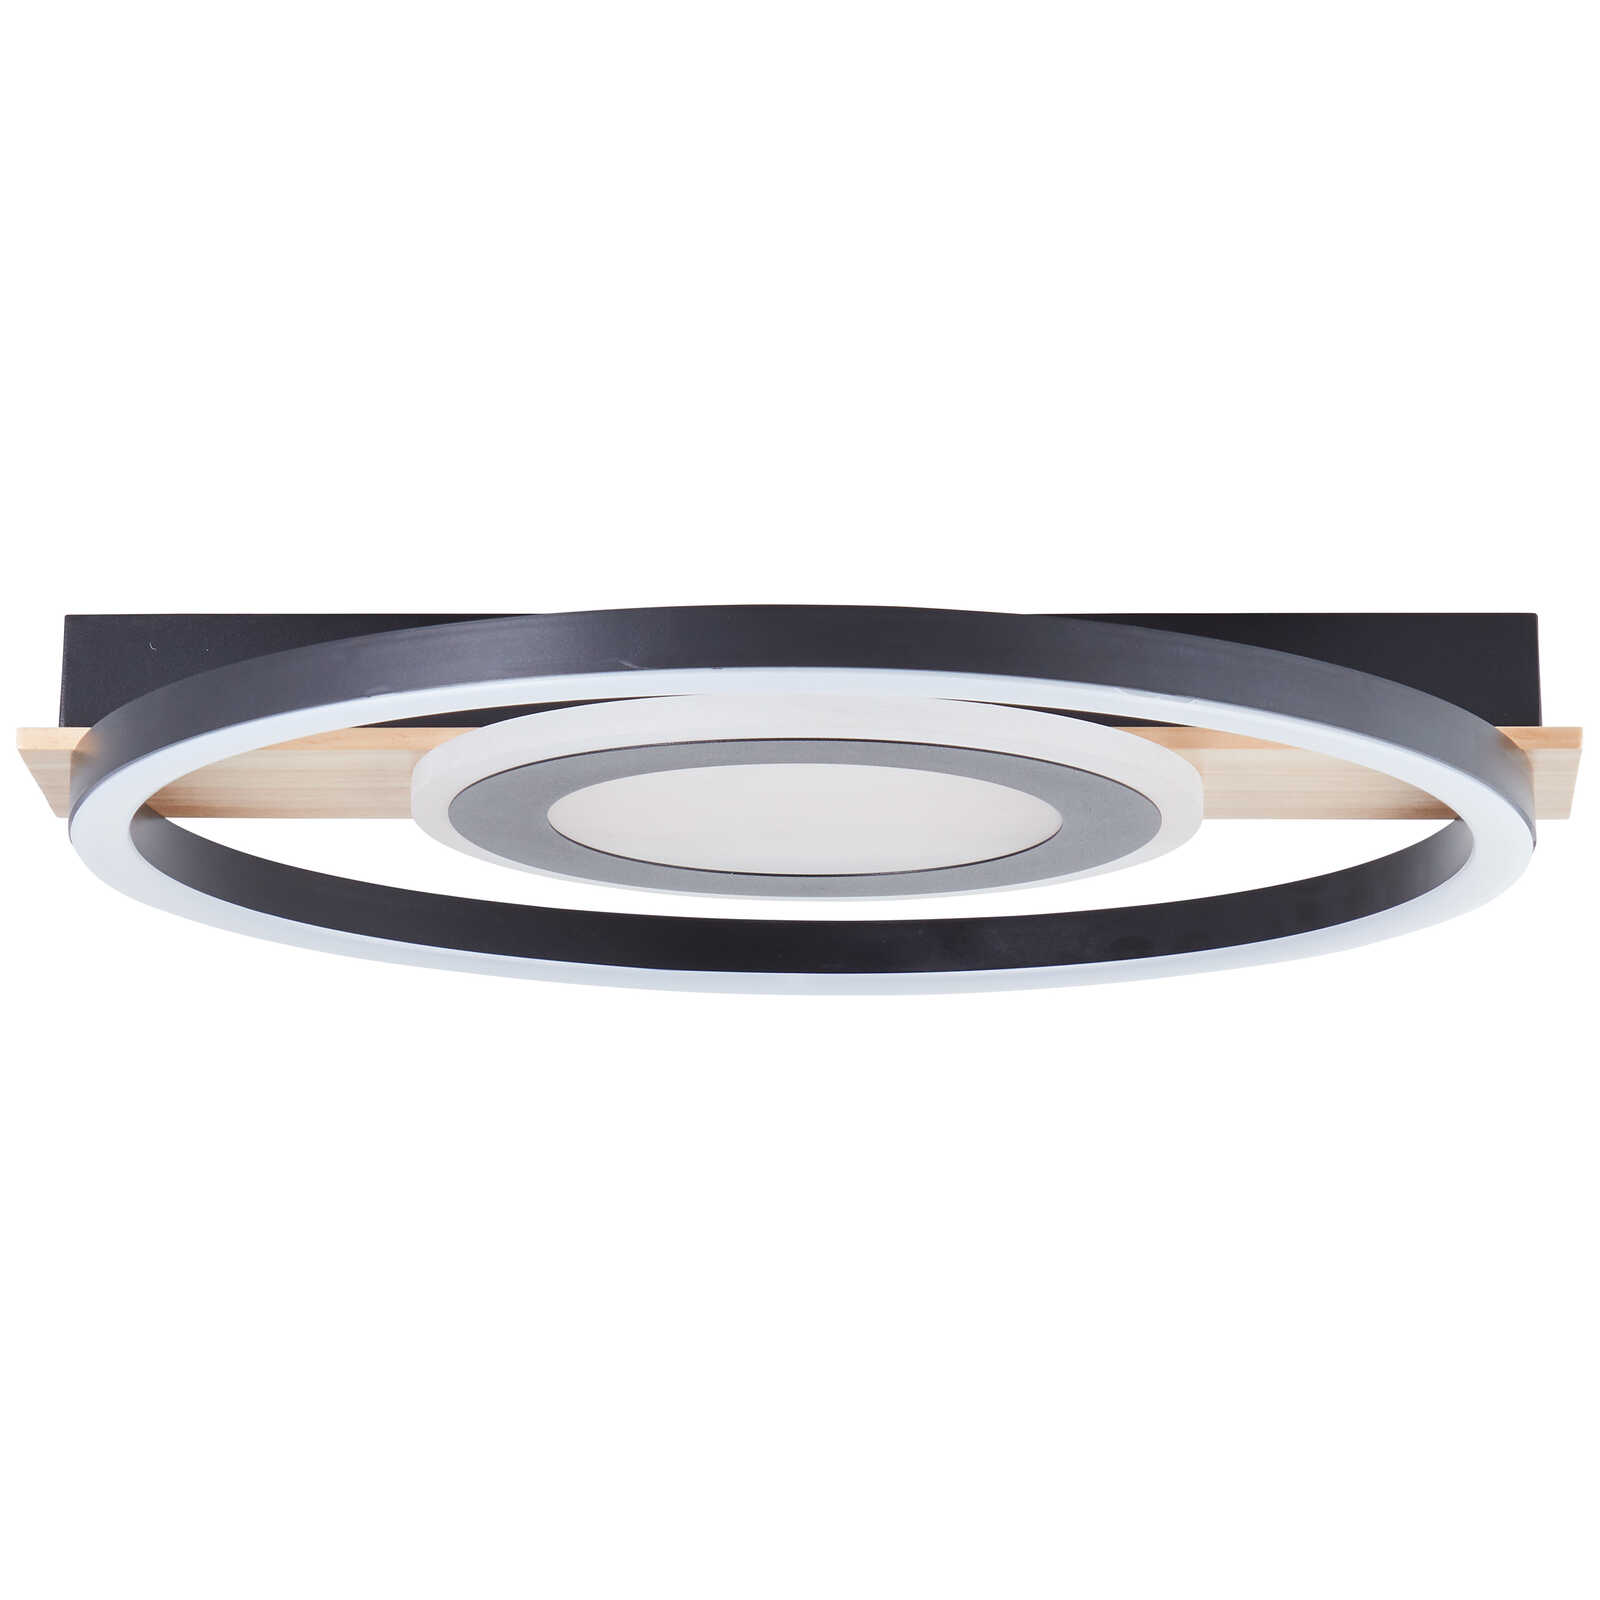             Wooden ceiling light - Leopold 2 - Brown
        